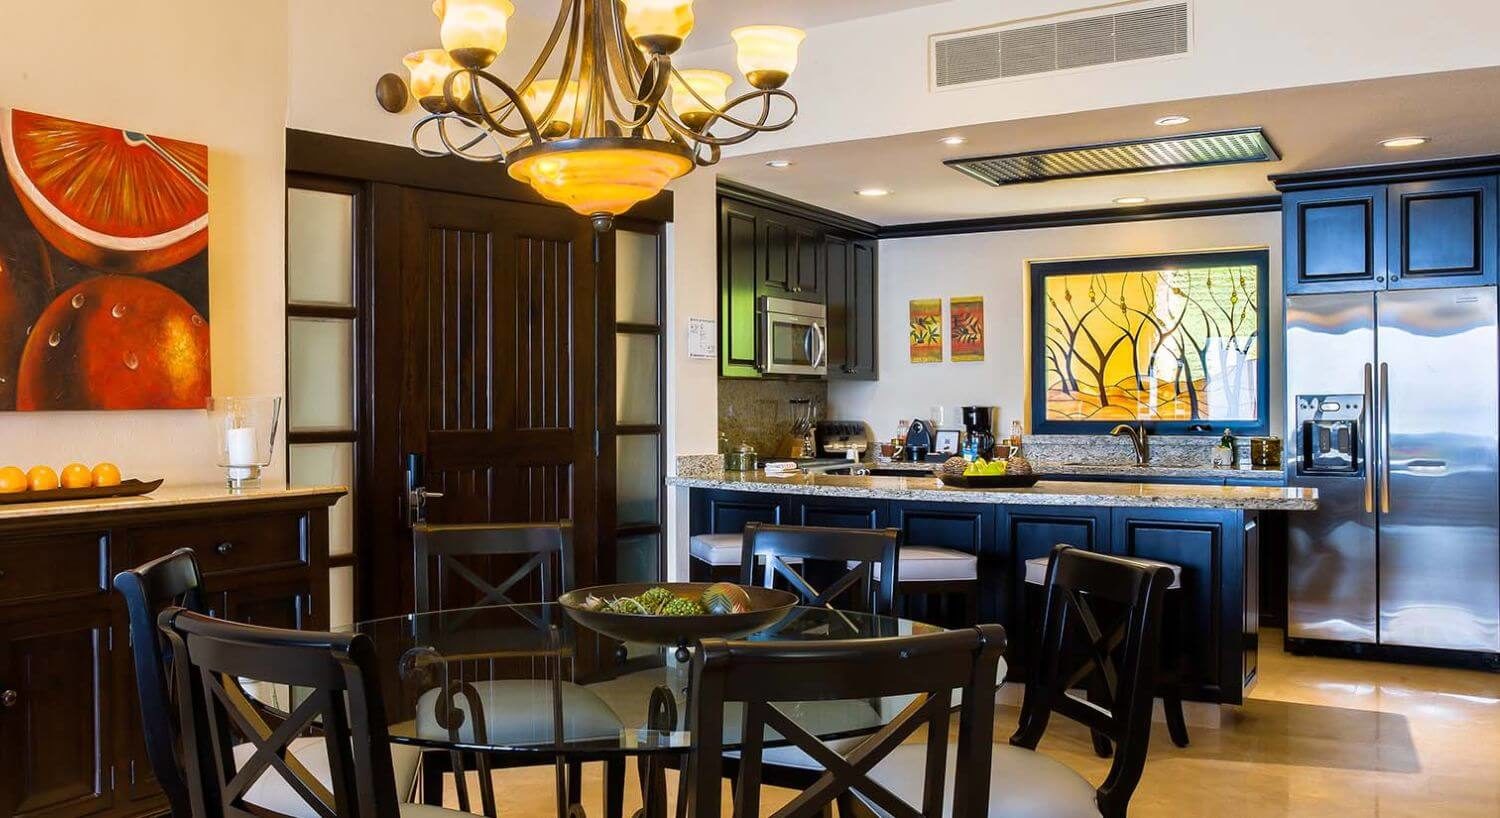 A kitchen and dining room with stainless steel appliances, granite countertops, rick dark brown furnishings, a glass tabletop, and a sideboard to match.